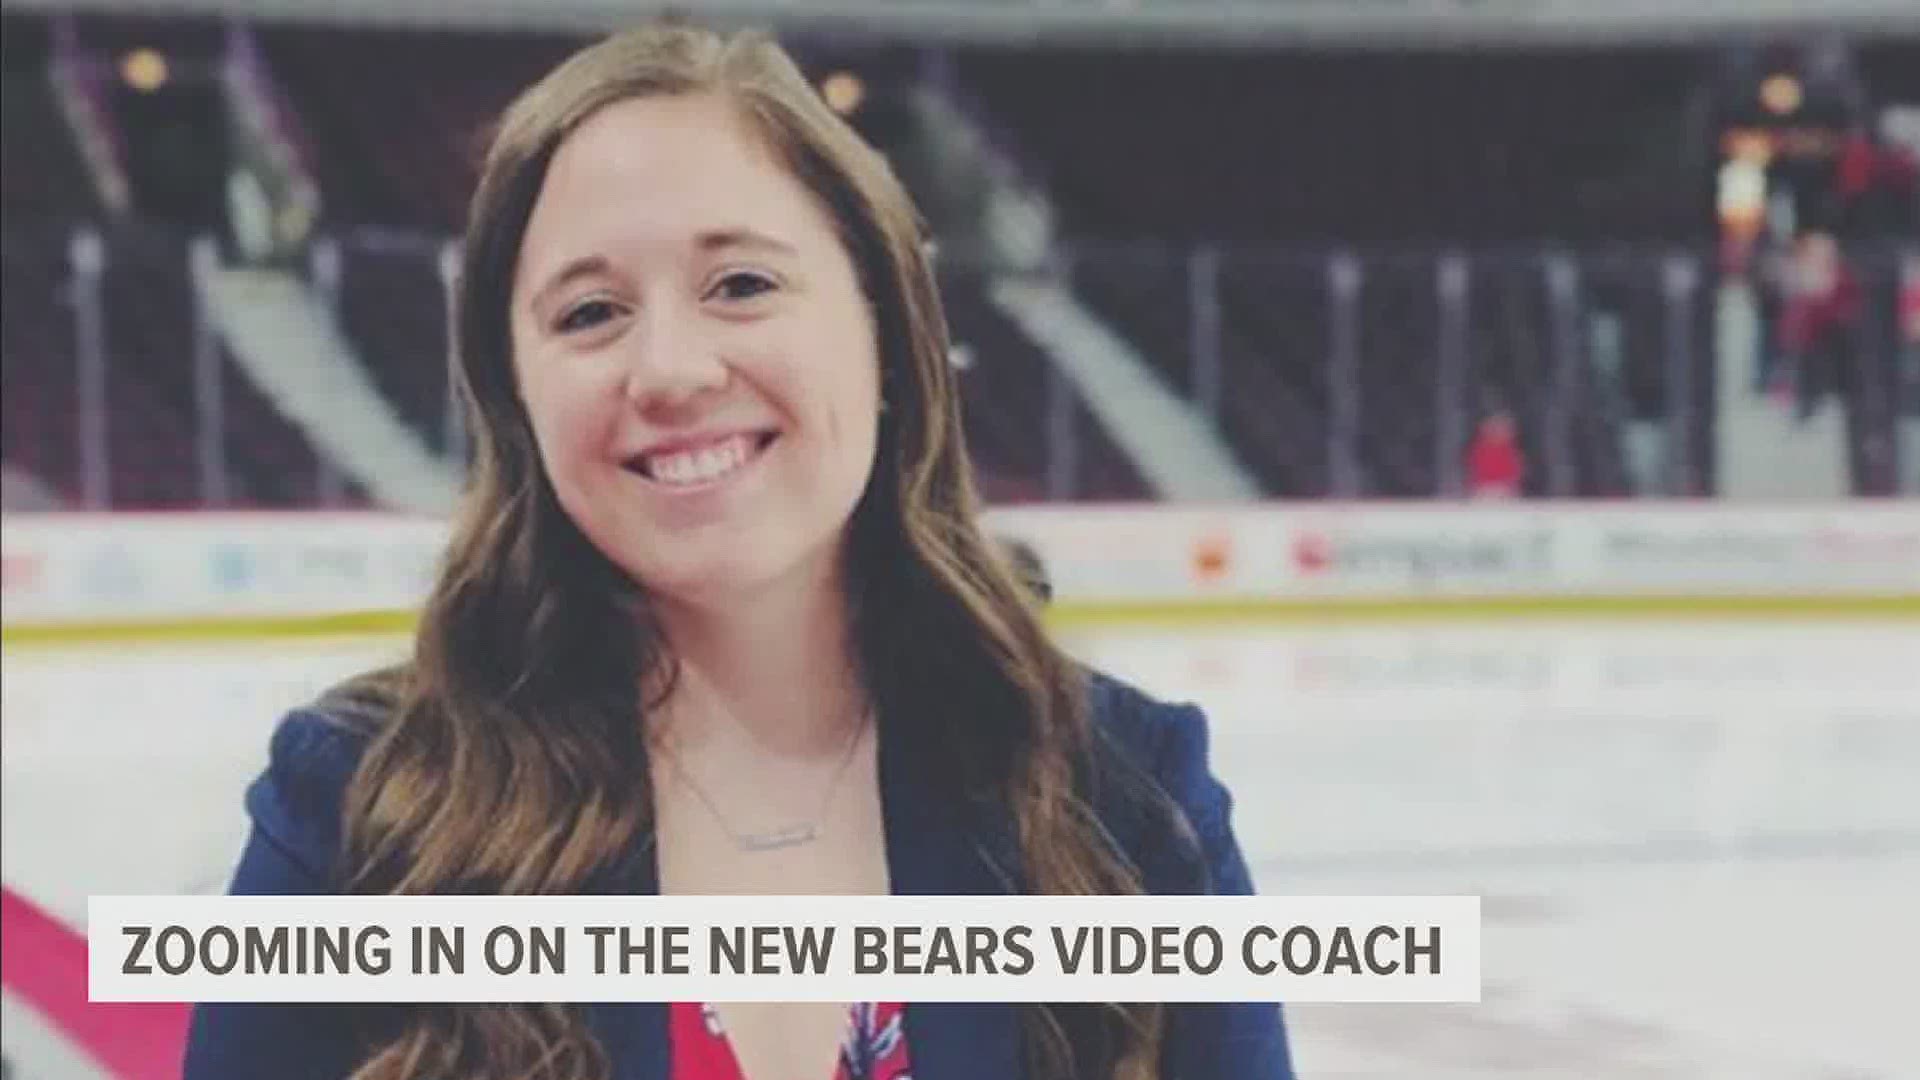 The newest member of the Hershey Bears coaching staff will make the jump from the Big Ten to the AHL.